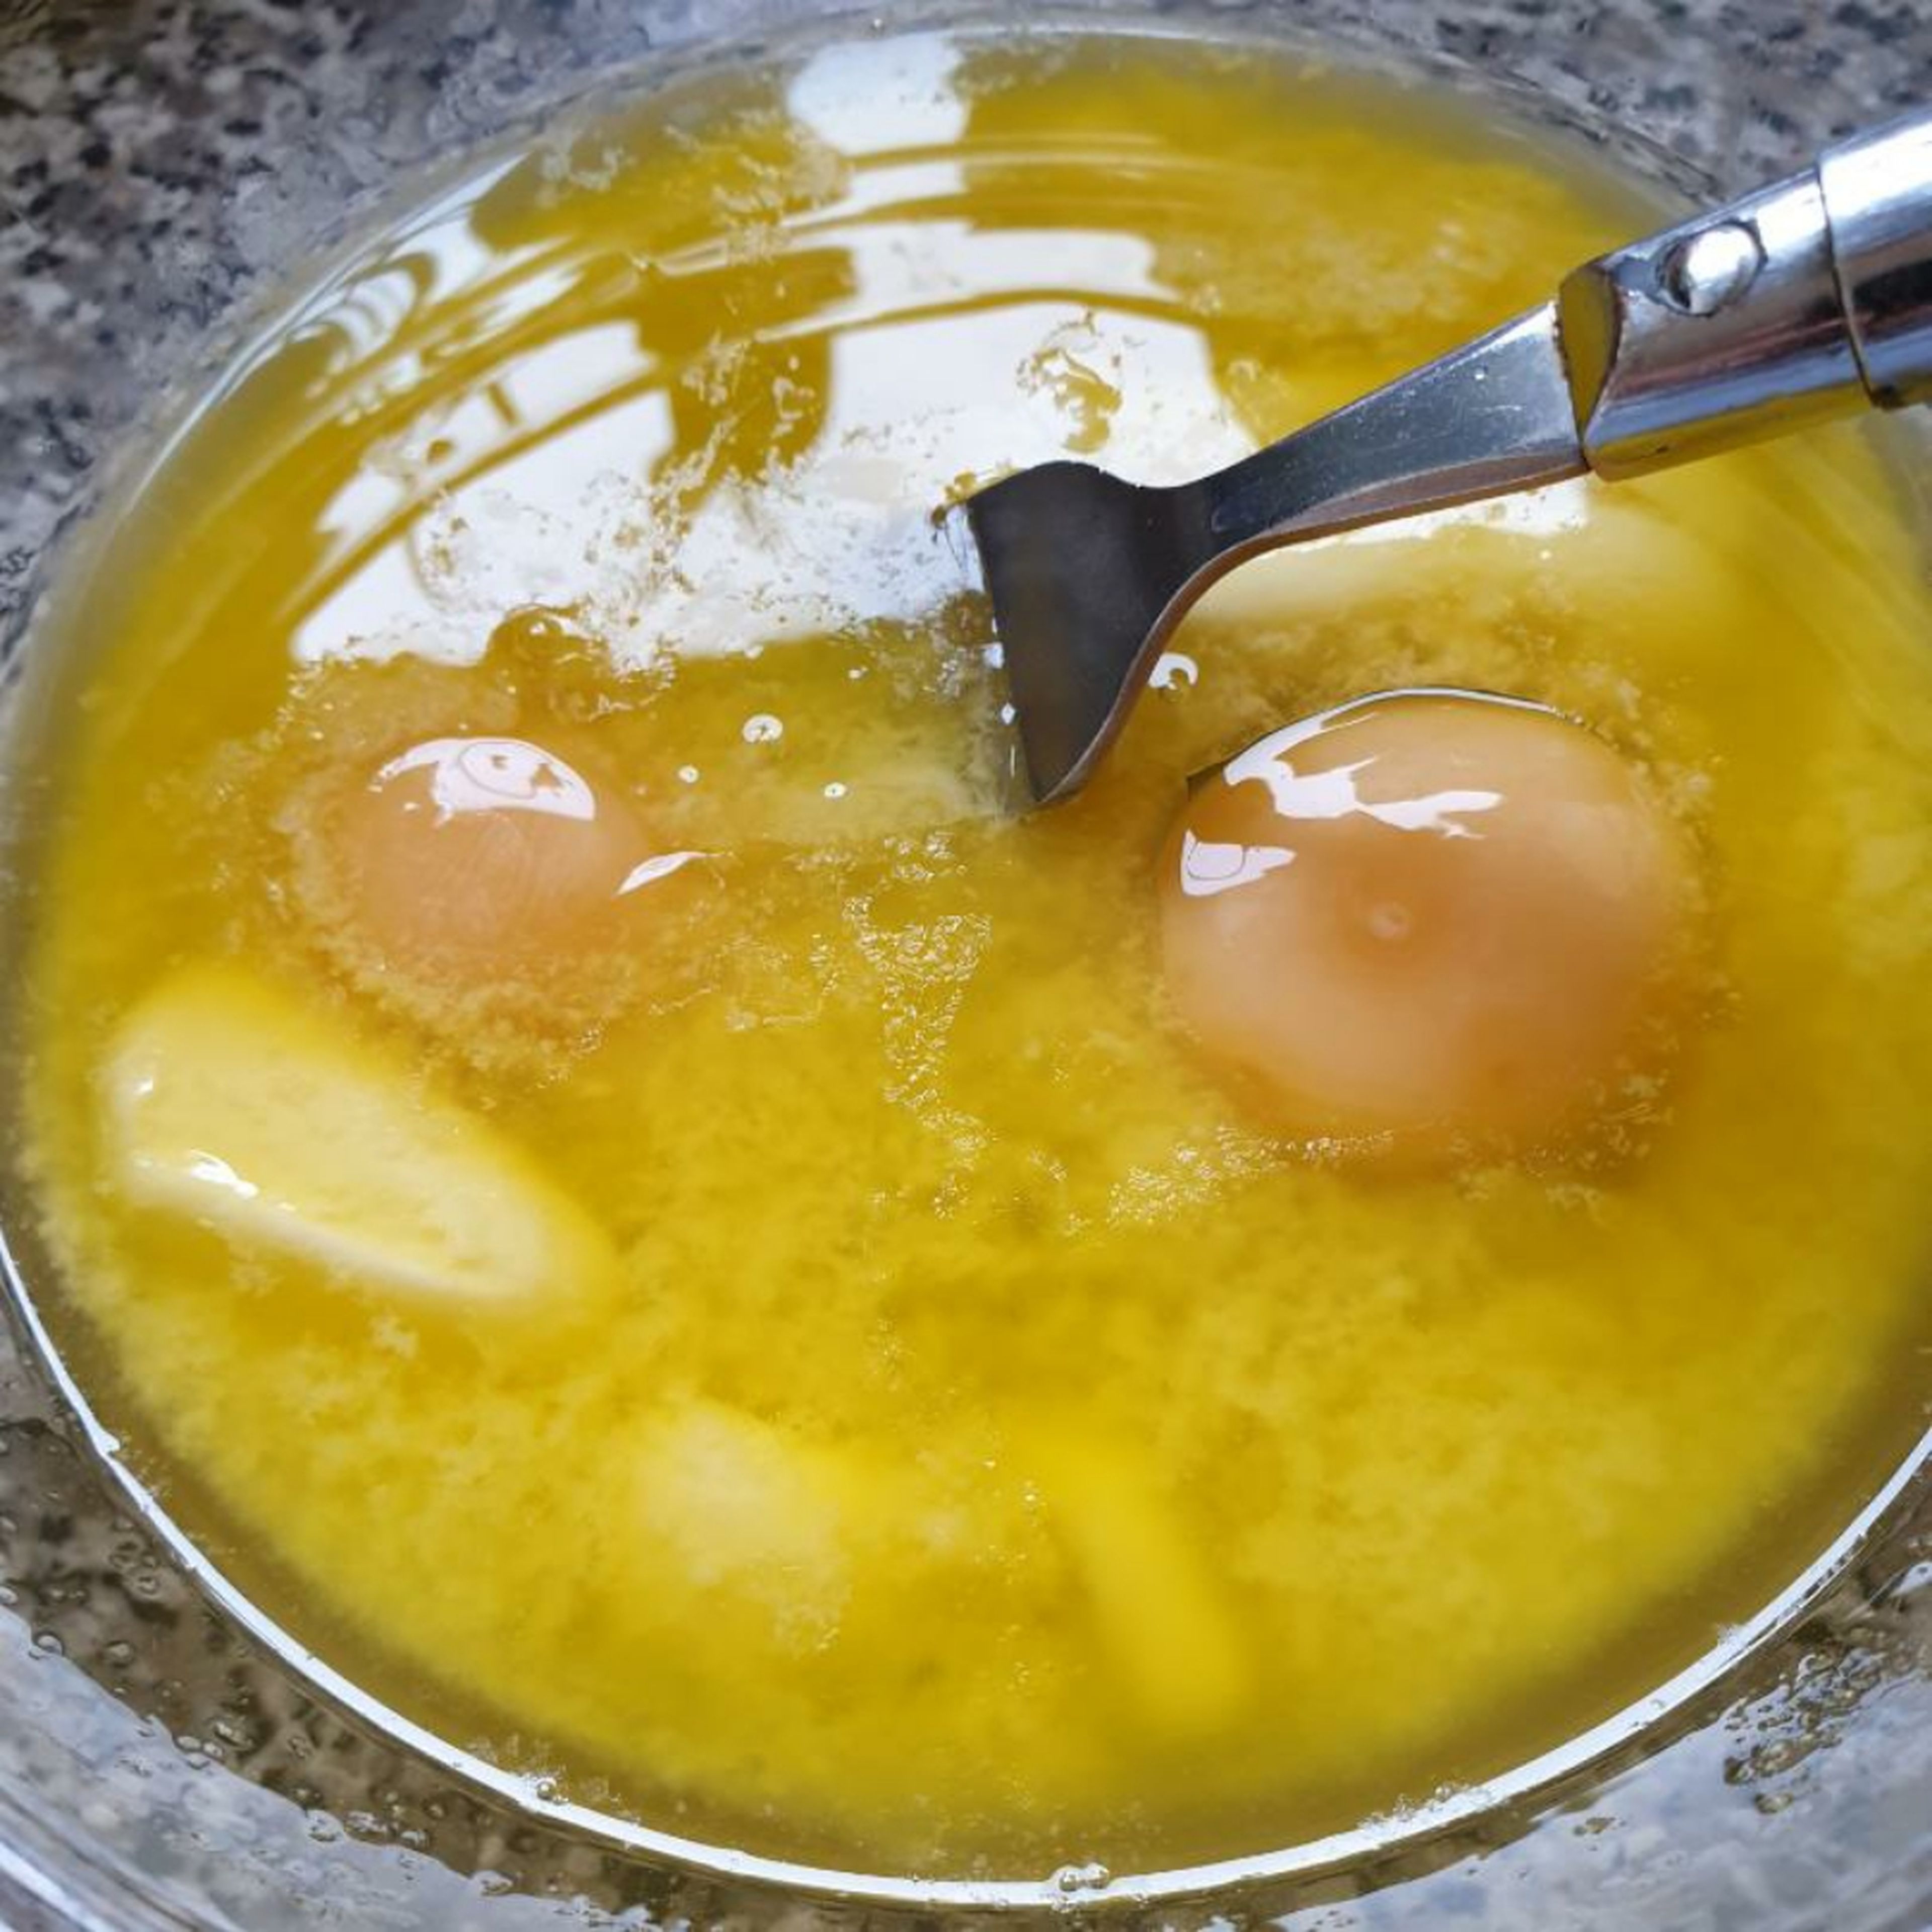 In a small bowl, melt the butter in the microwave. Add the egg, milk and vanilla to the butter mixture and stir to combine.